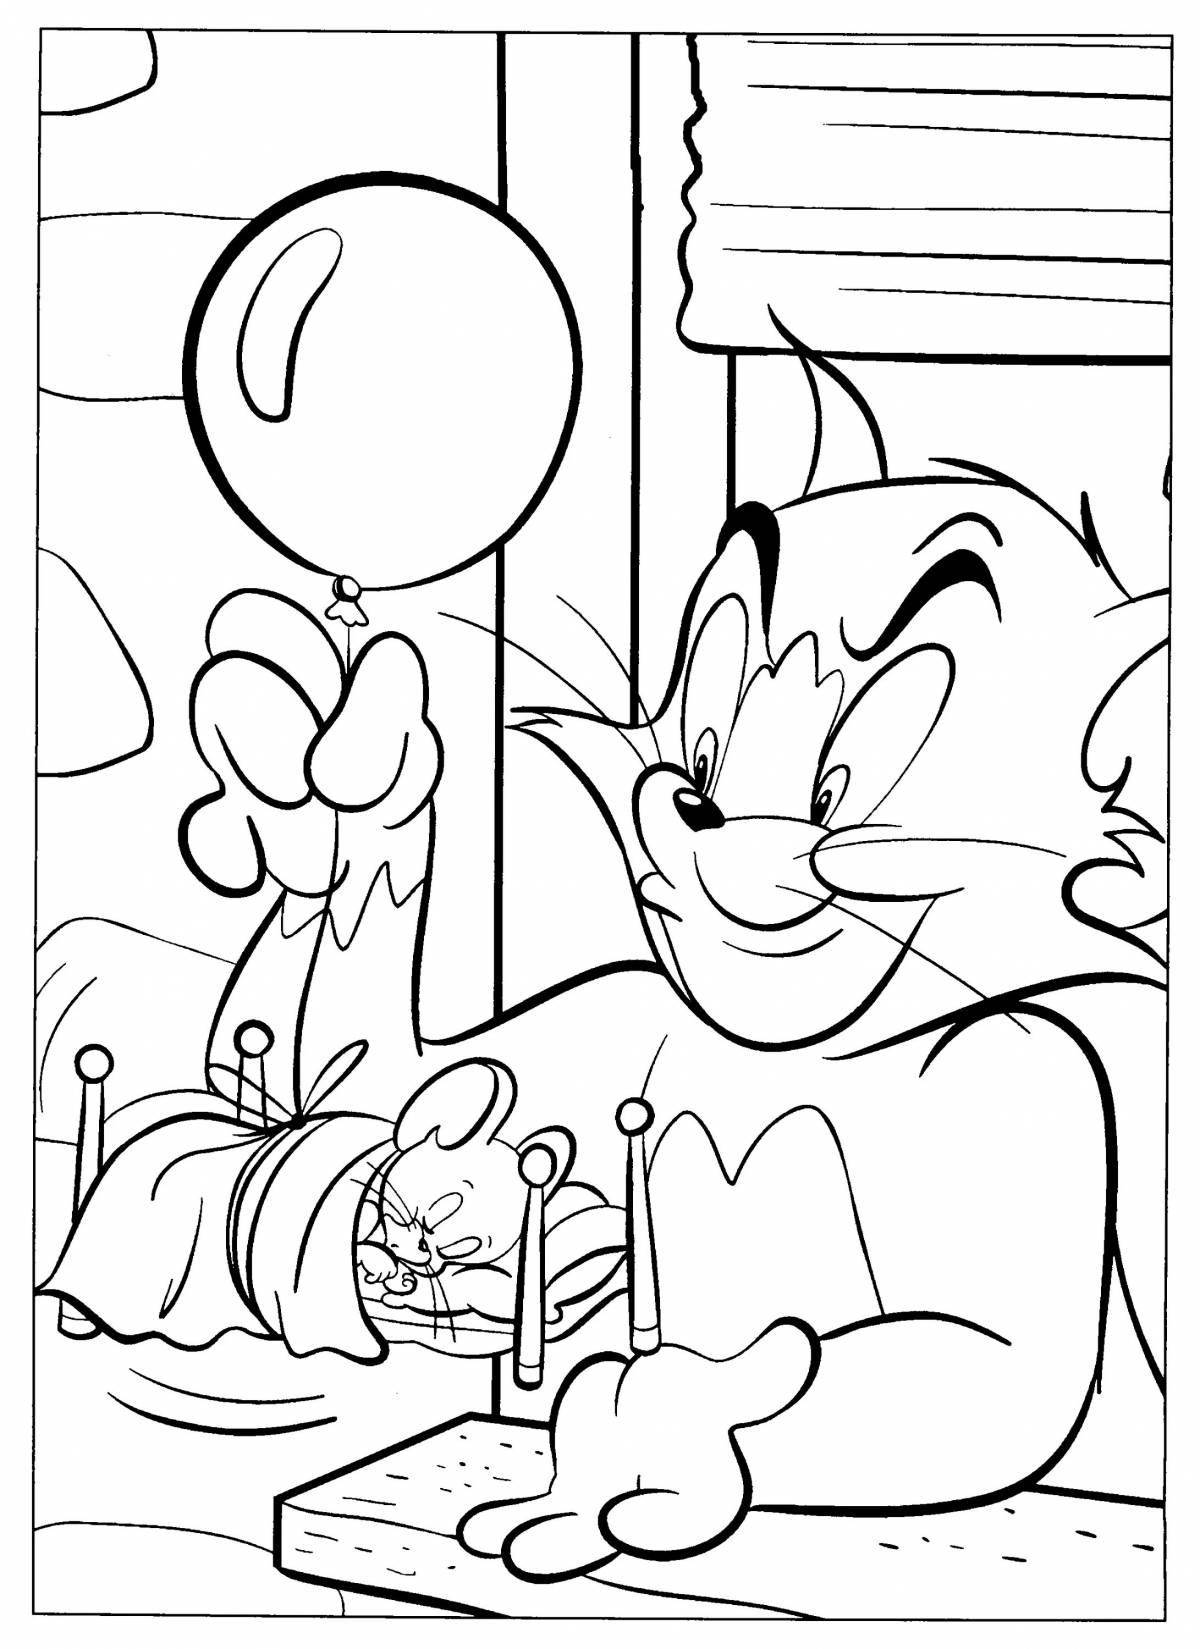 Tom and jerry complex coloring book